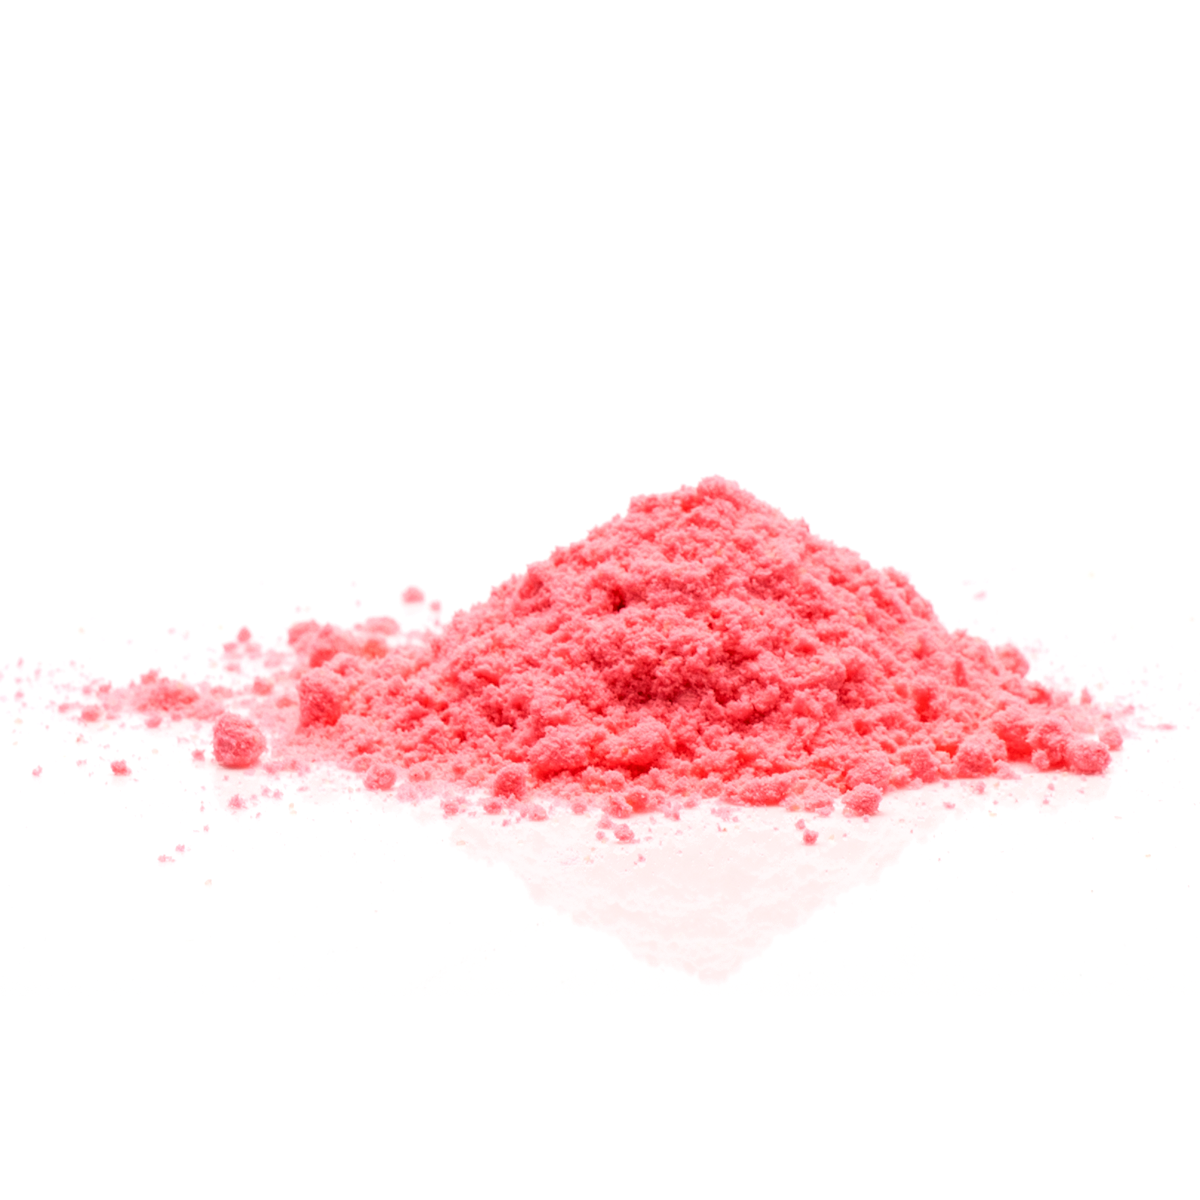 Fluoro Pink Wafter Mix Zoomed